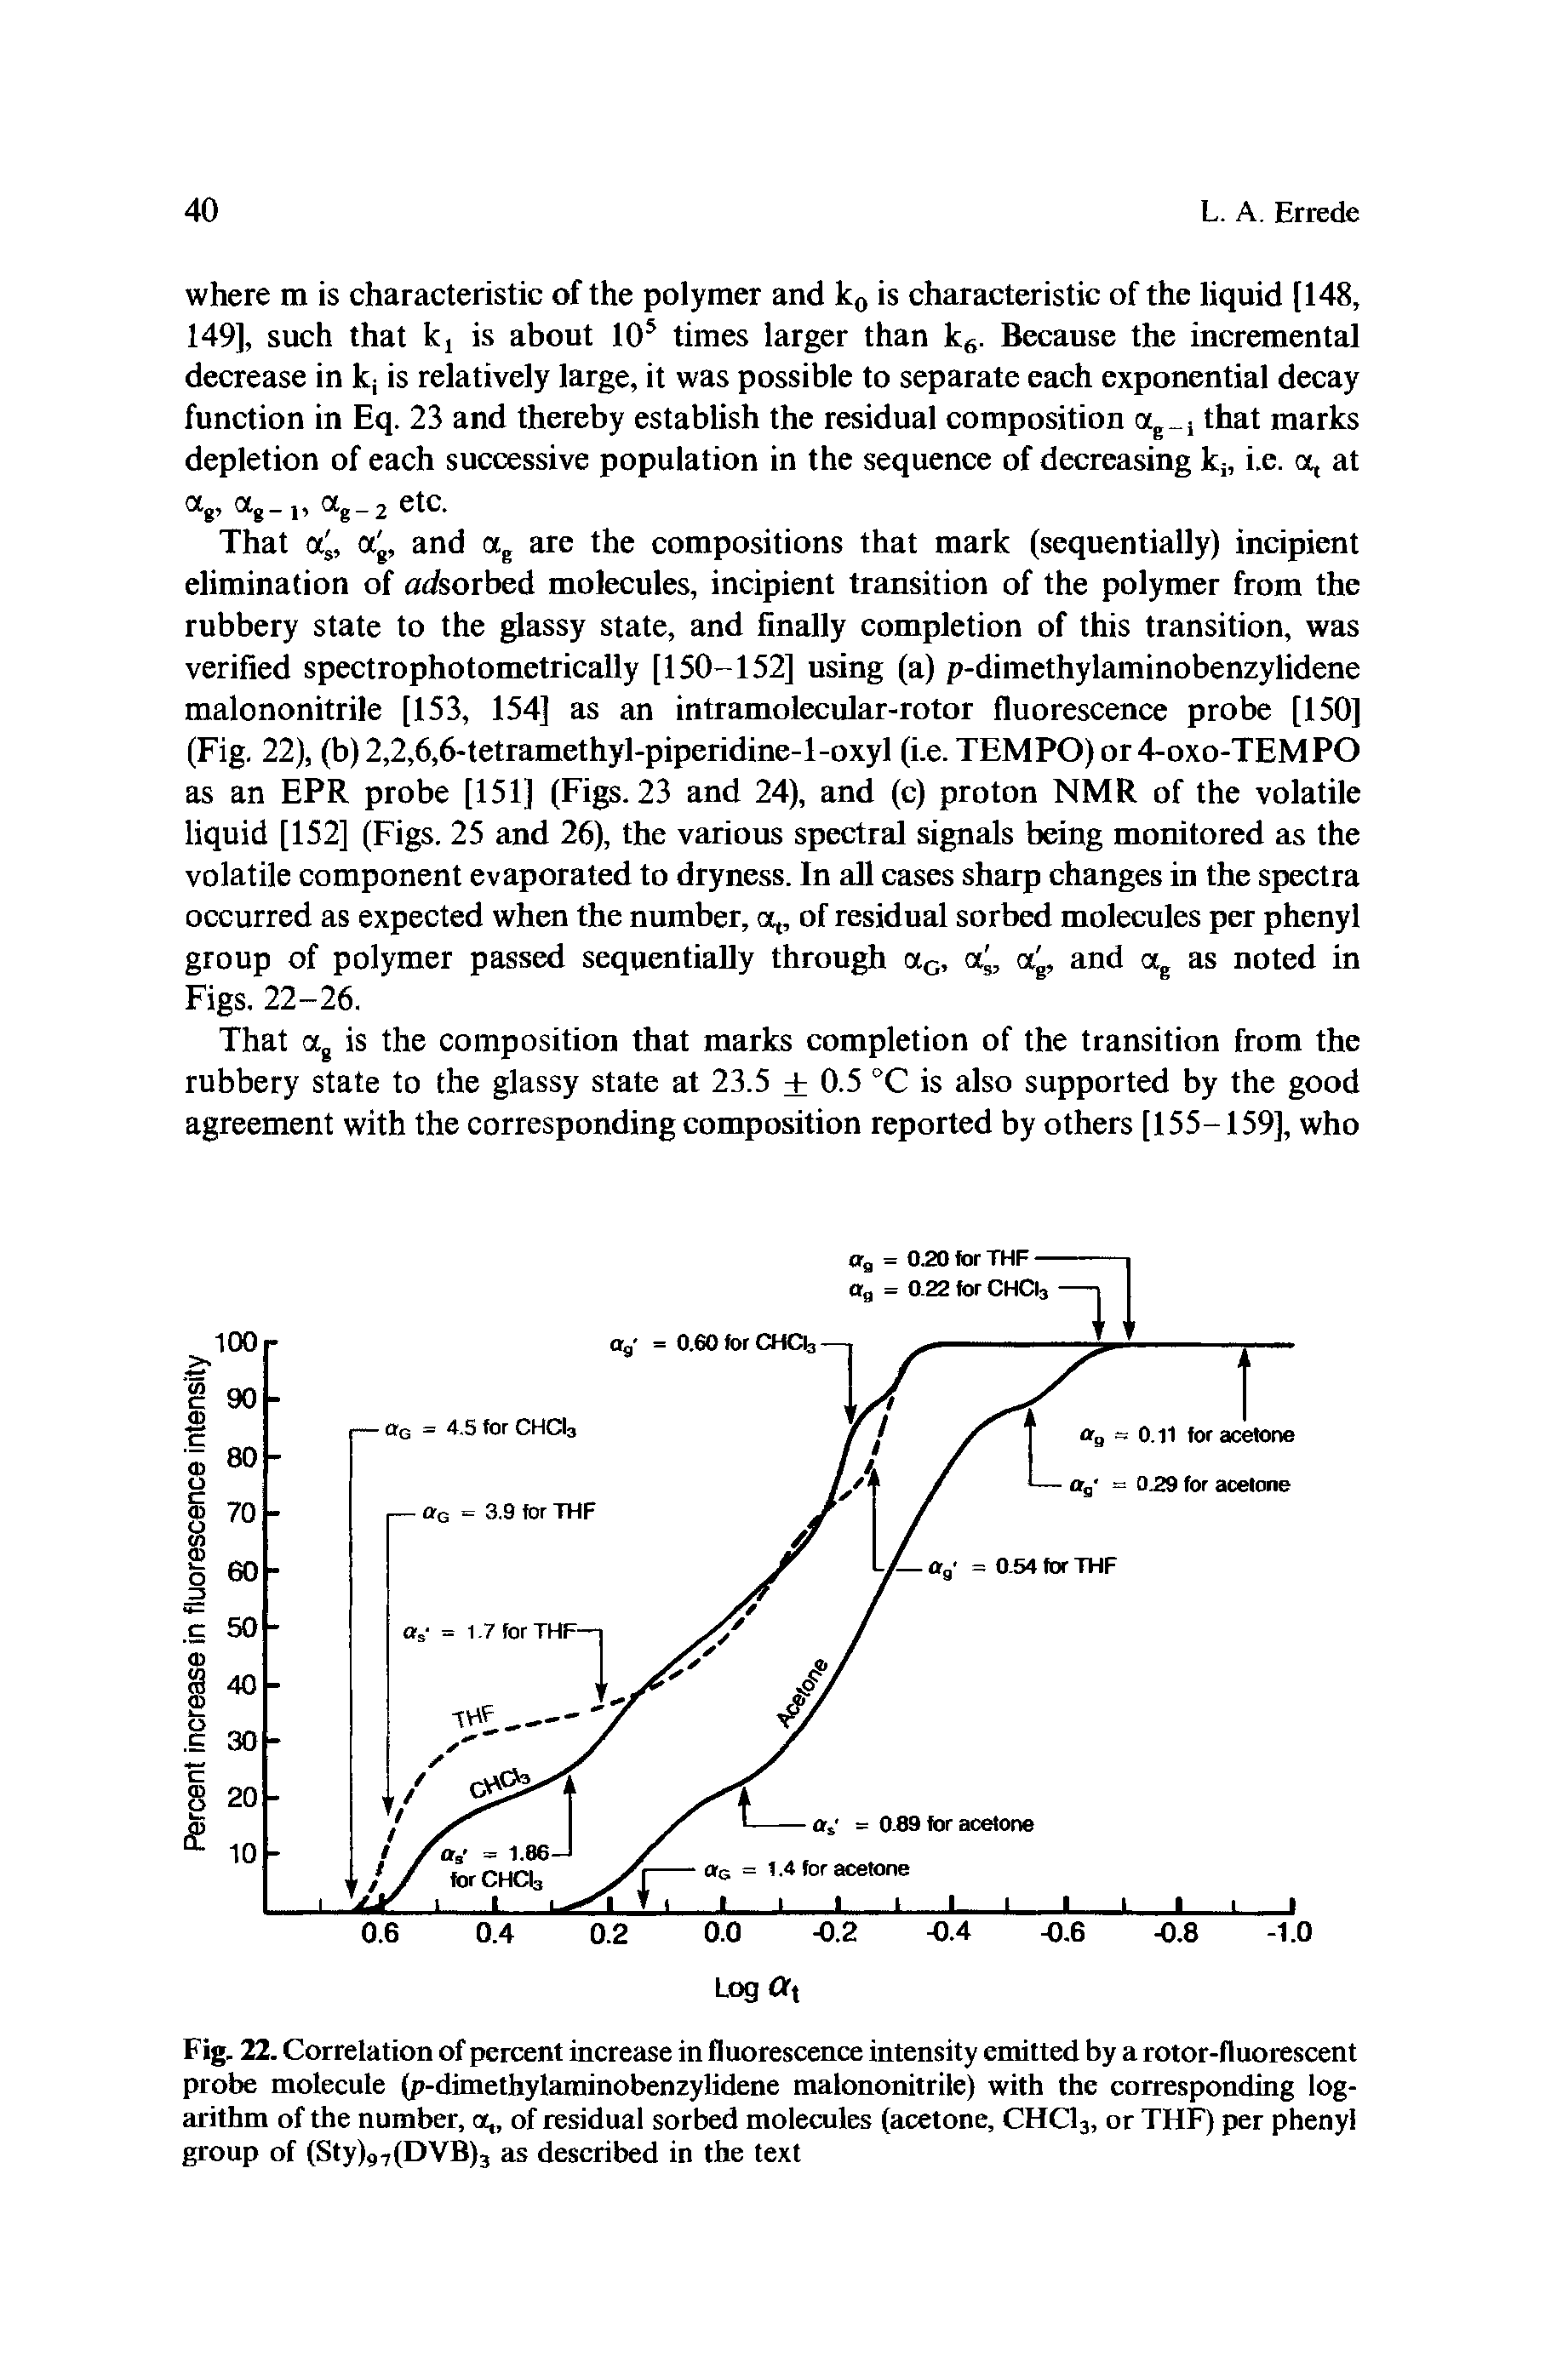 Fig. 22. Correlation of percent increase in fluorescence intensity emitted by a rotor-fluorescent probe molecule (p-dimethylaminobenzylidene malononitrile) with the corresponding logarithm of the number, a, of residual sorbed molecules (acetone, CHC13, or THF) per phenyl group of (Sty)97(DVB)3 as described in the text...